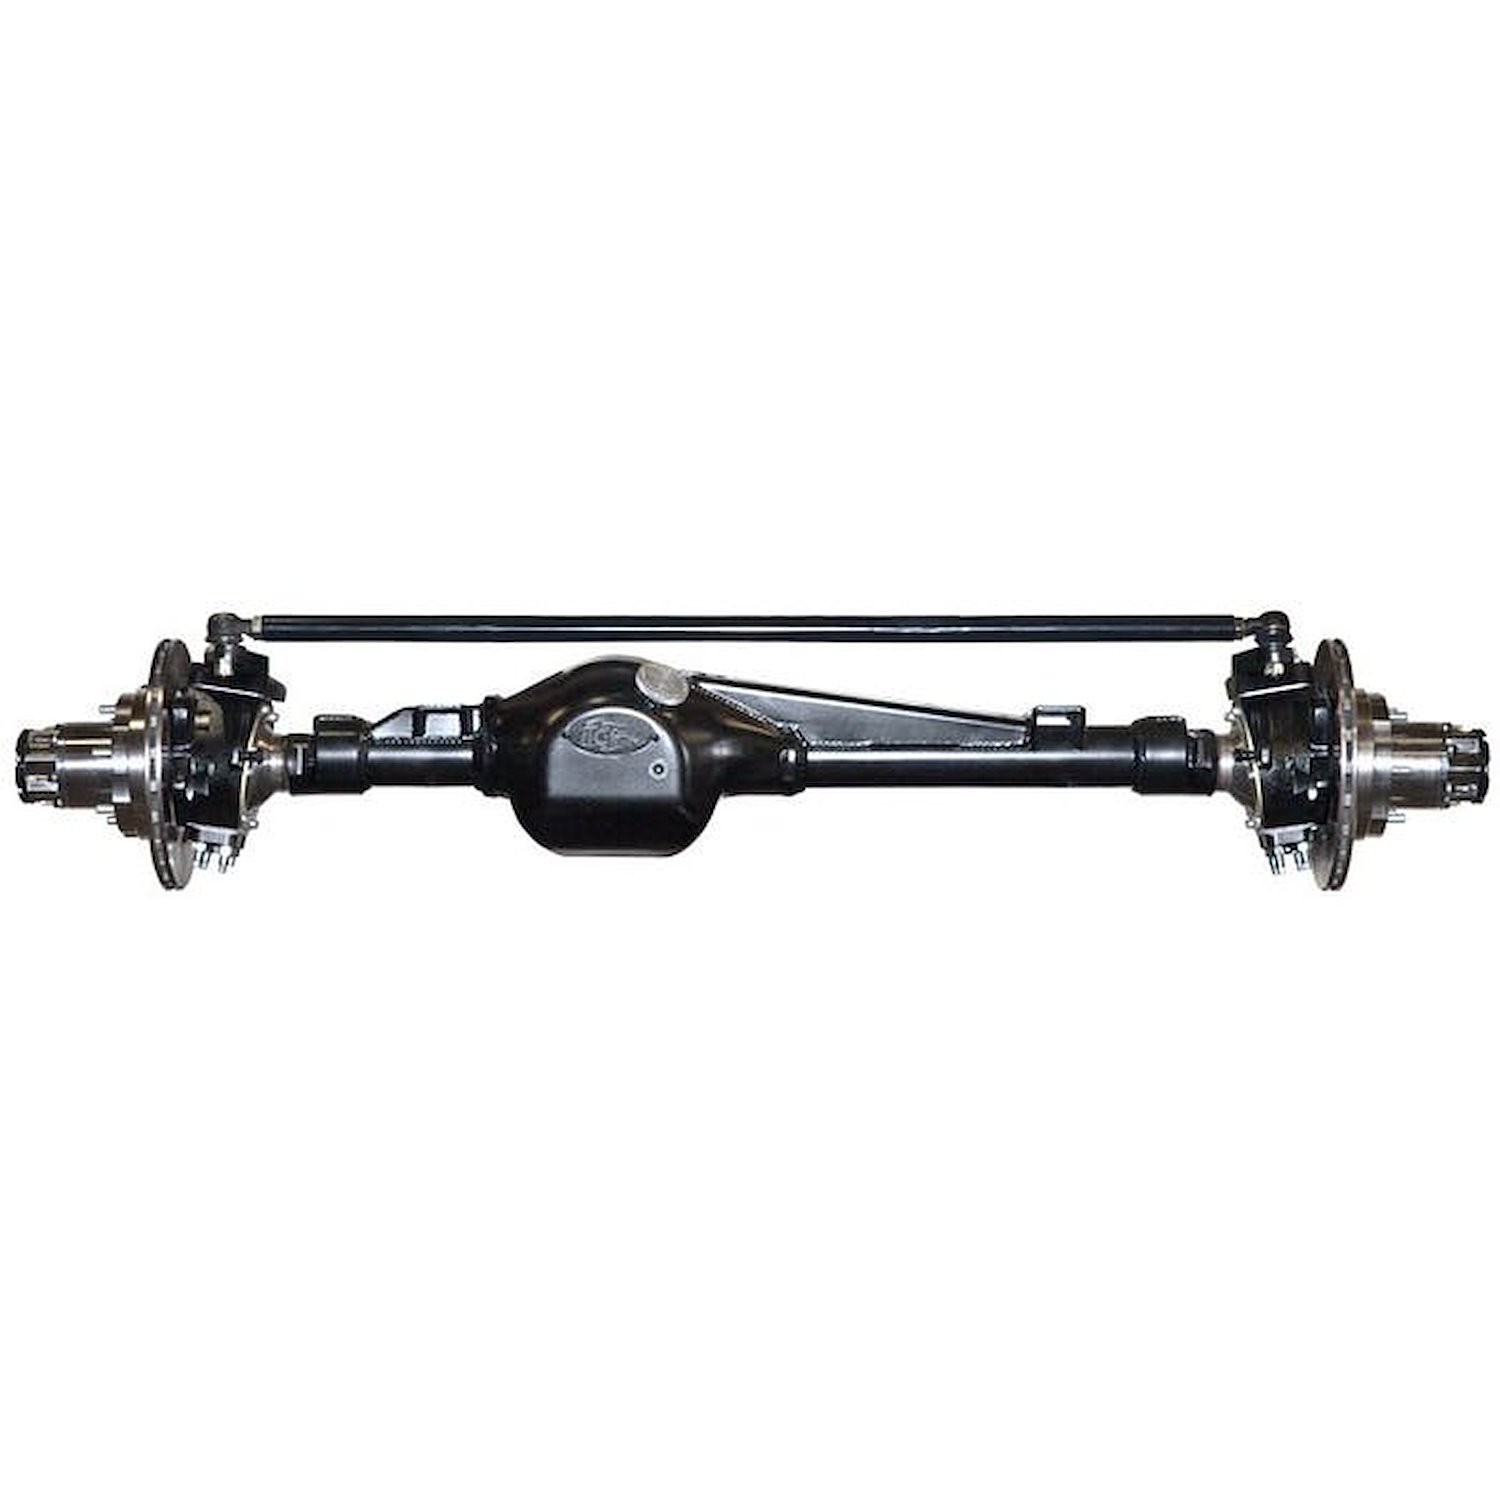 301252-1-KIT Rock Assault Fully-Built Front Axles, +3 Width LHD High-Pinion 4.88 Detroit Creeper Flanges Toyota